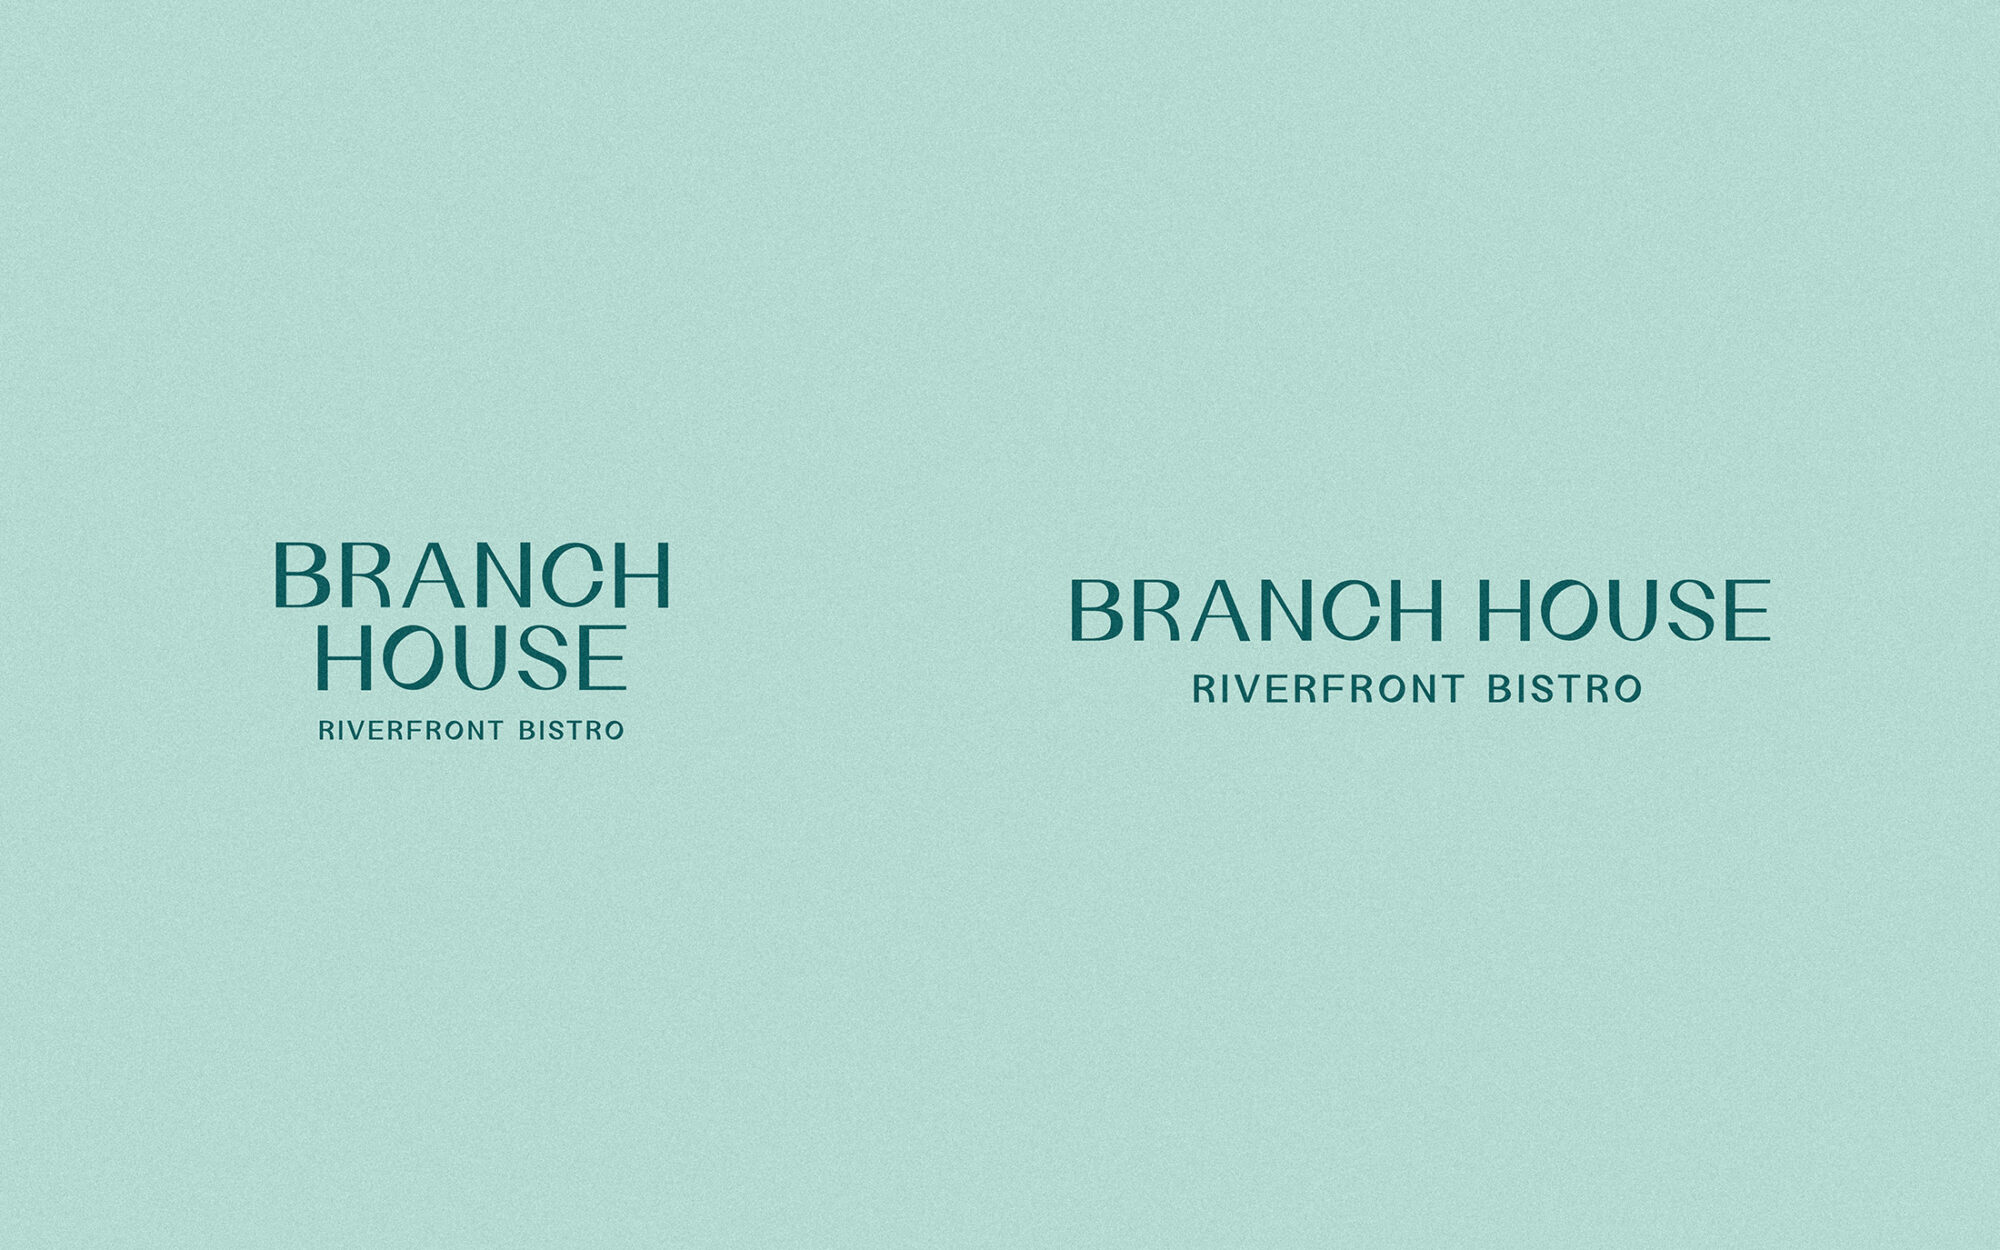 branch house word mark layouts for Redding California riverside bistro.